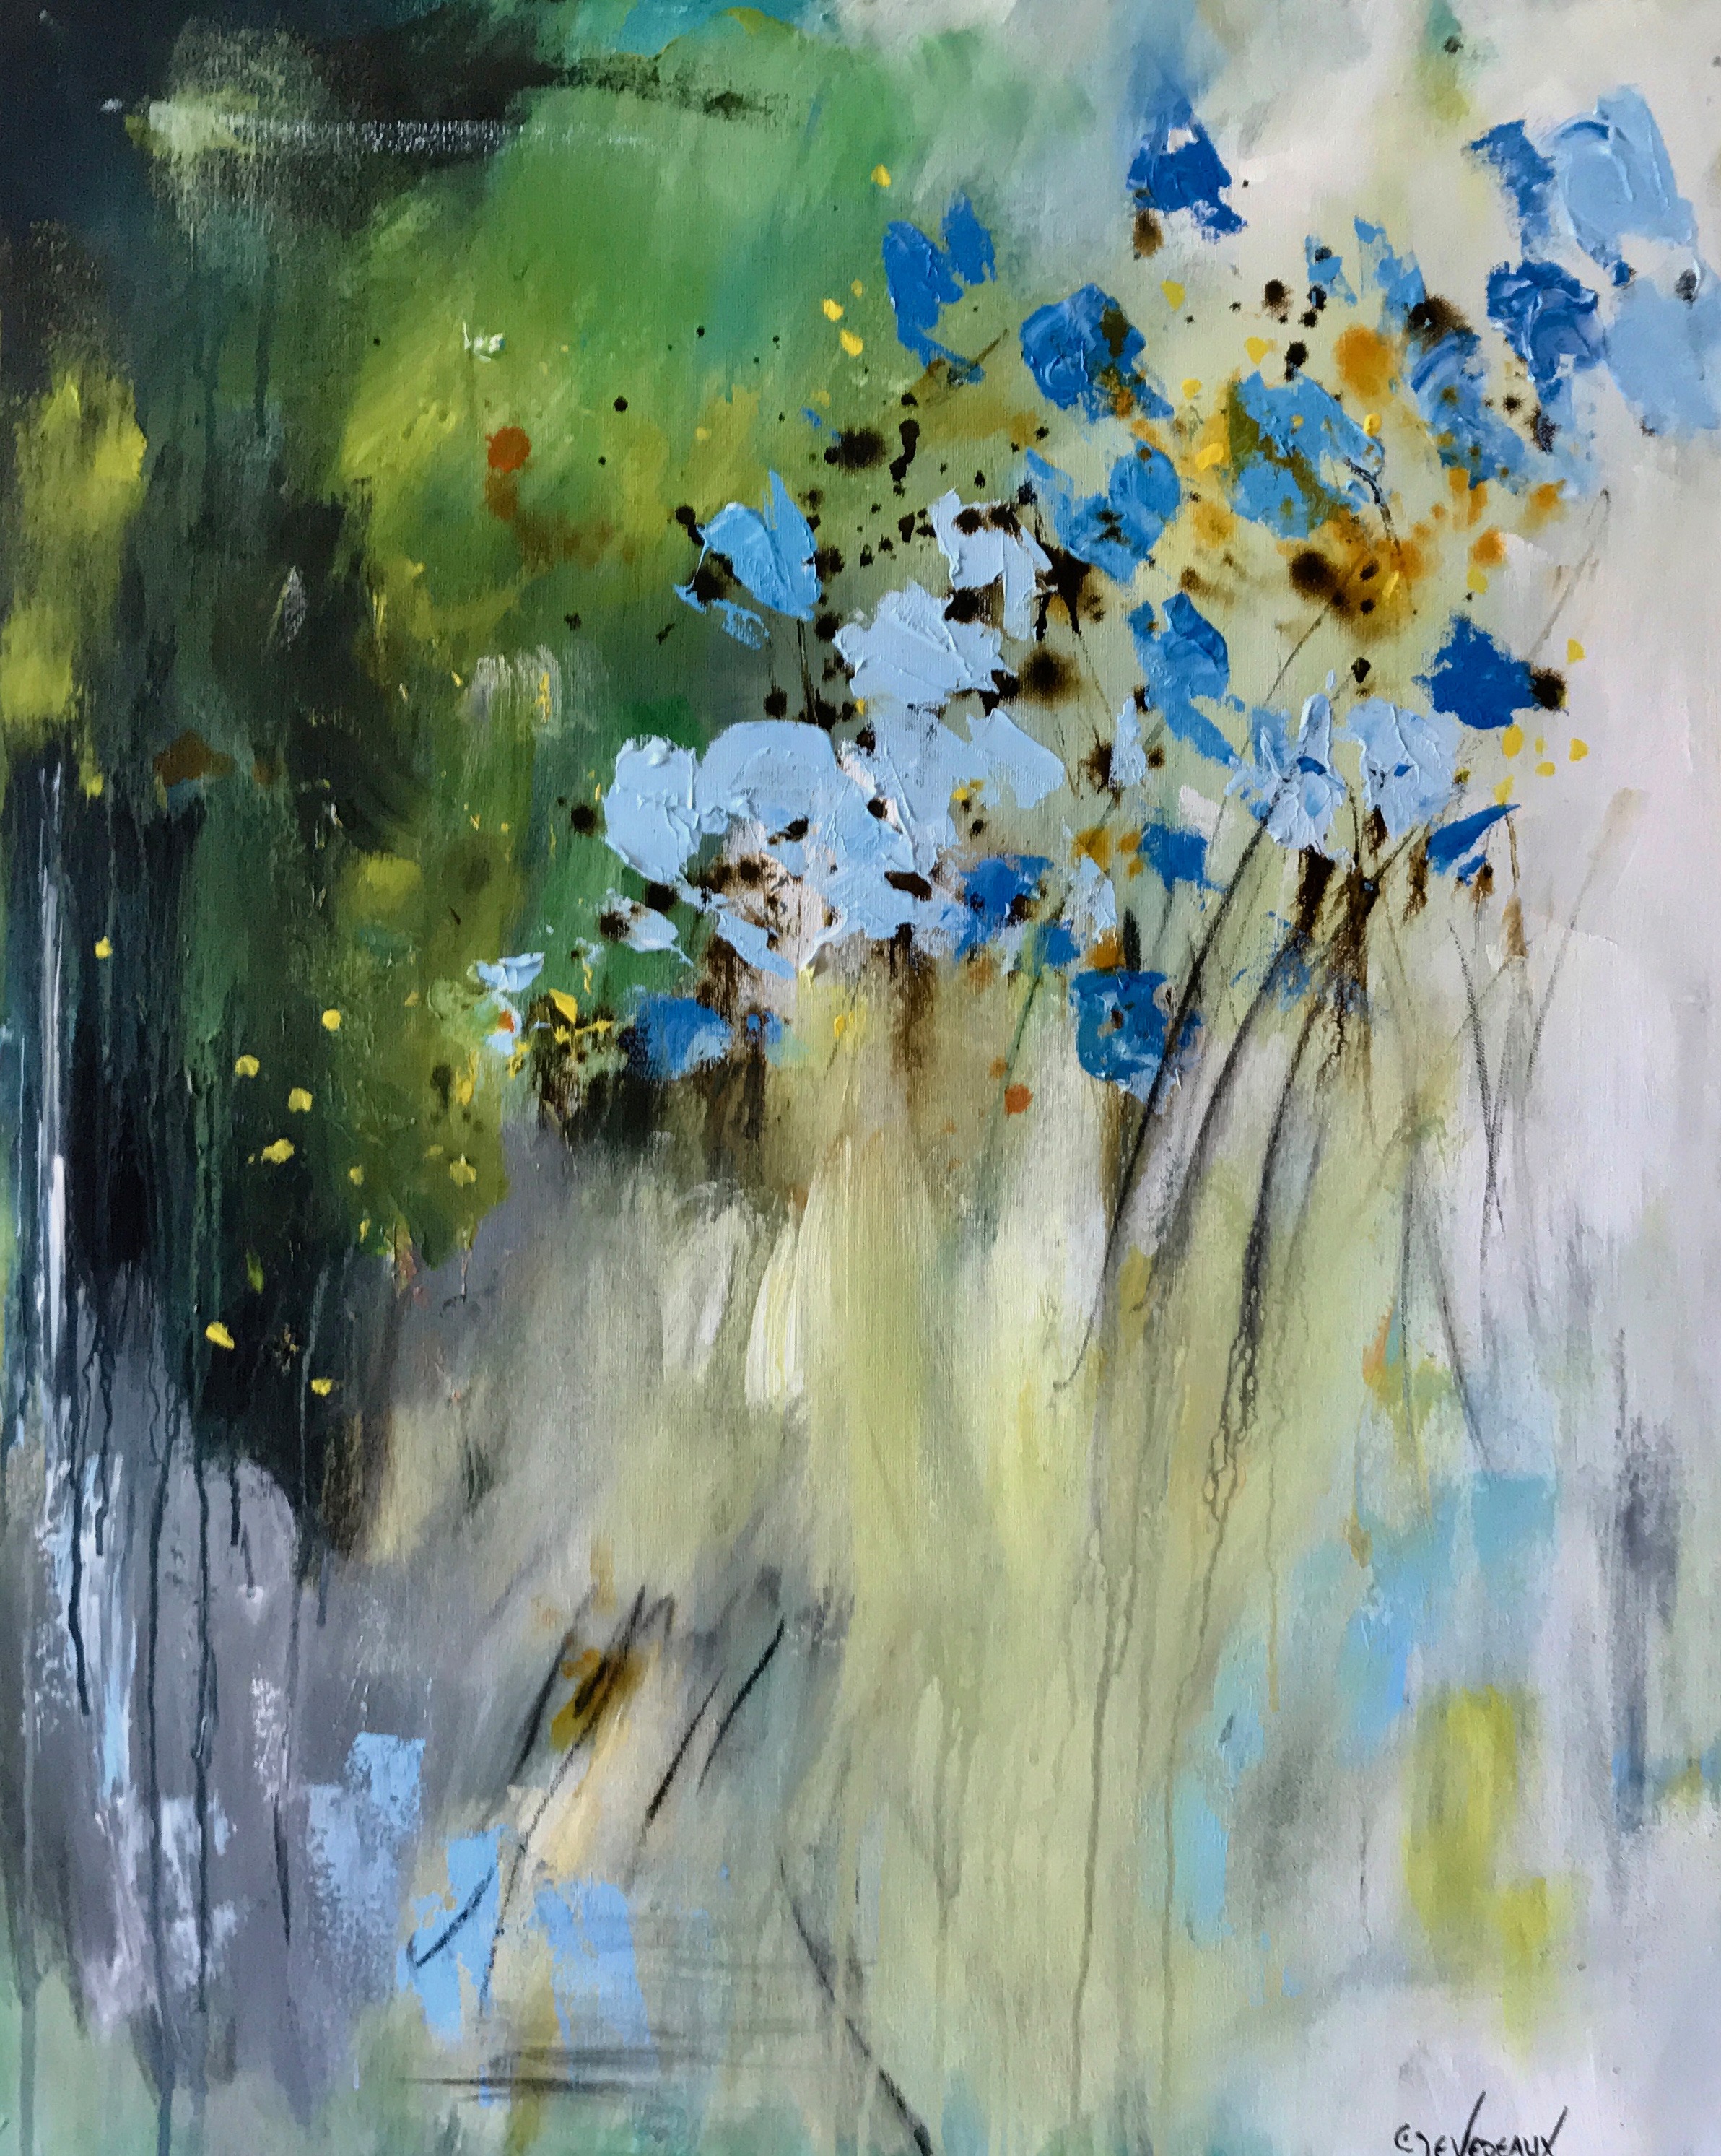 'Feeling Blue 2' 24x30 in  contemporary modern flower, floral painting by Cher Devereaux on stretched canvas.